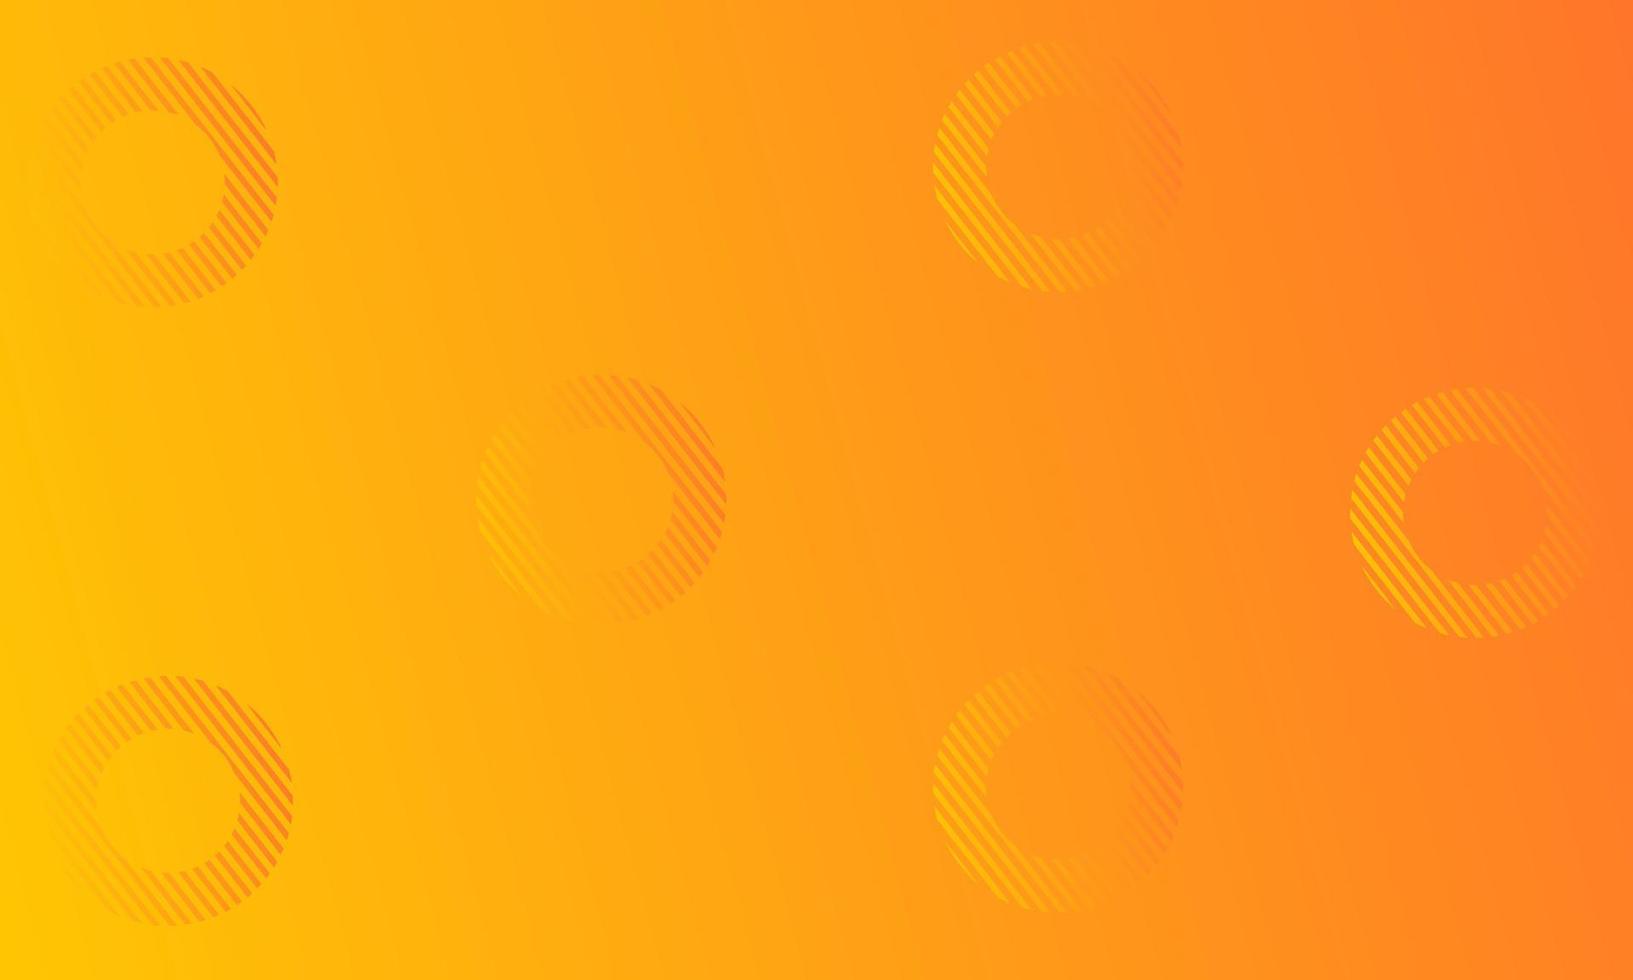 plain banner with orange gradient background and circle elements vector